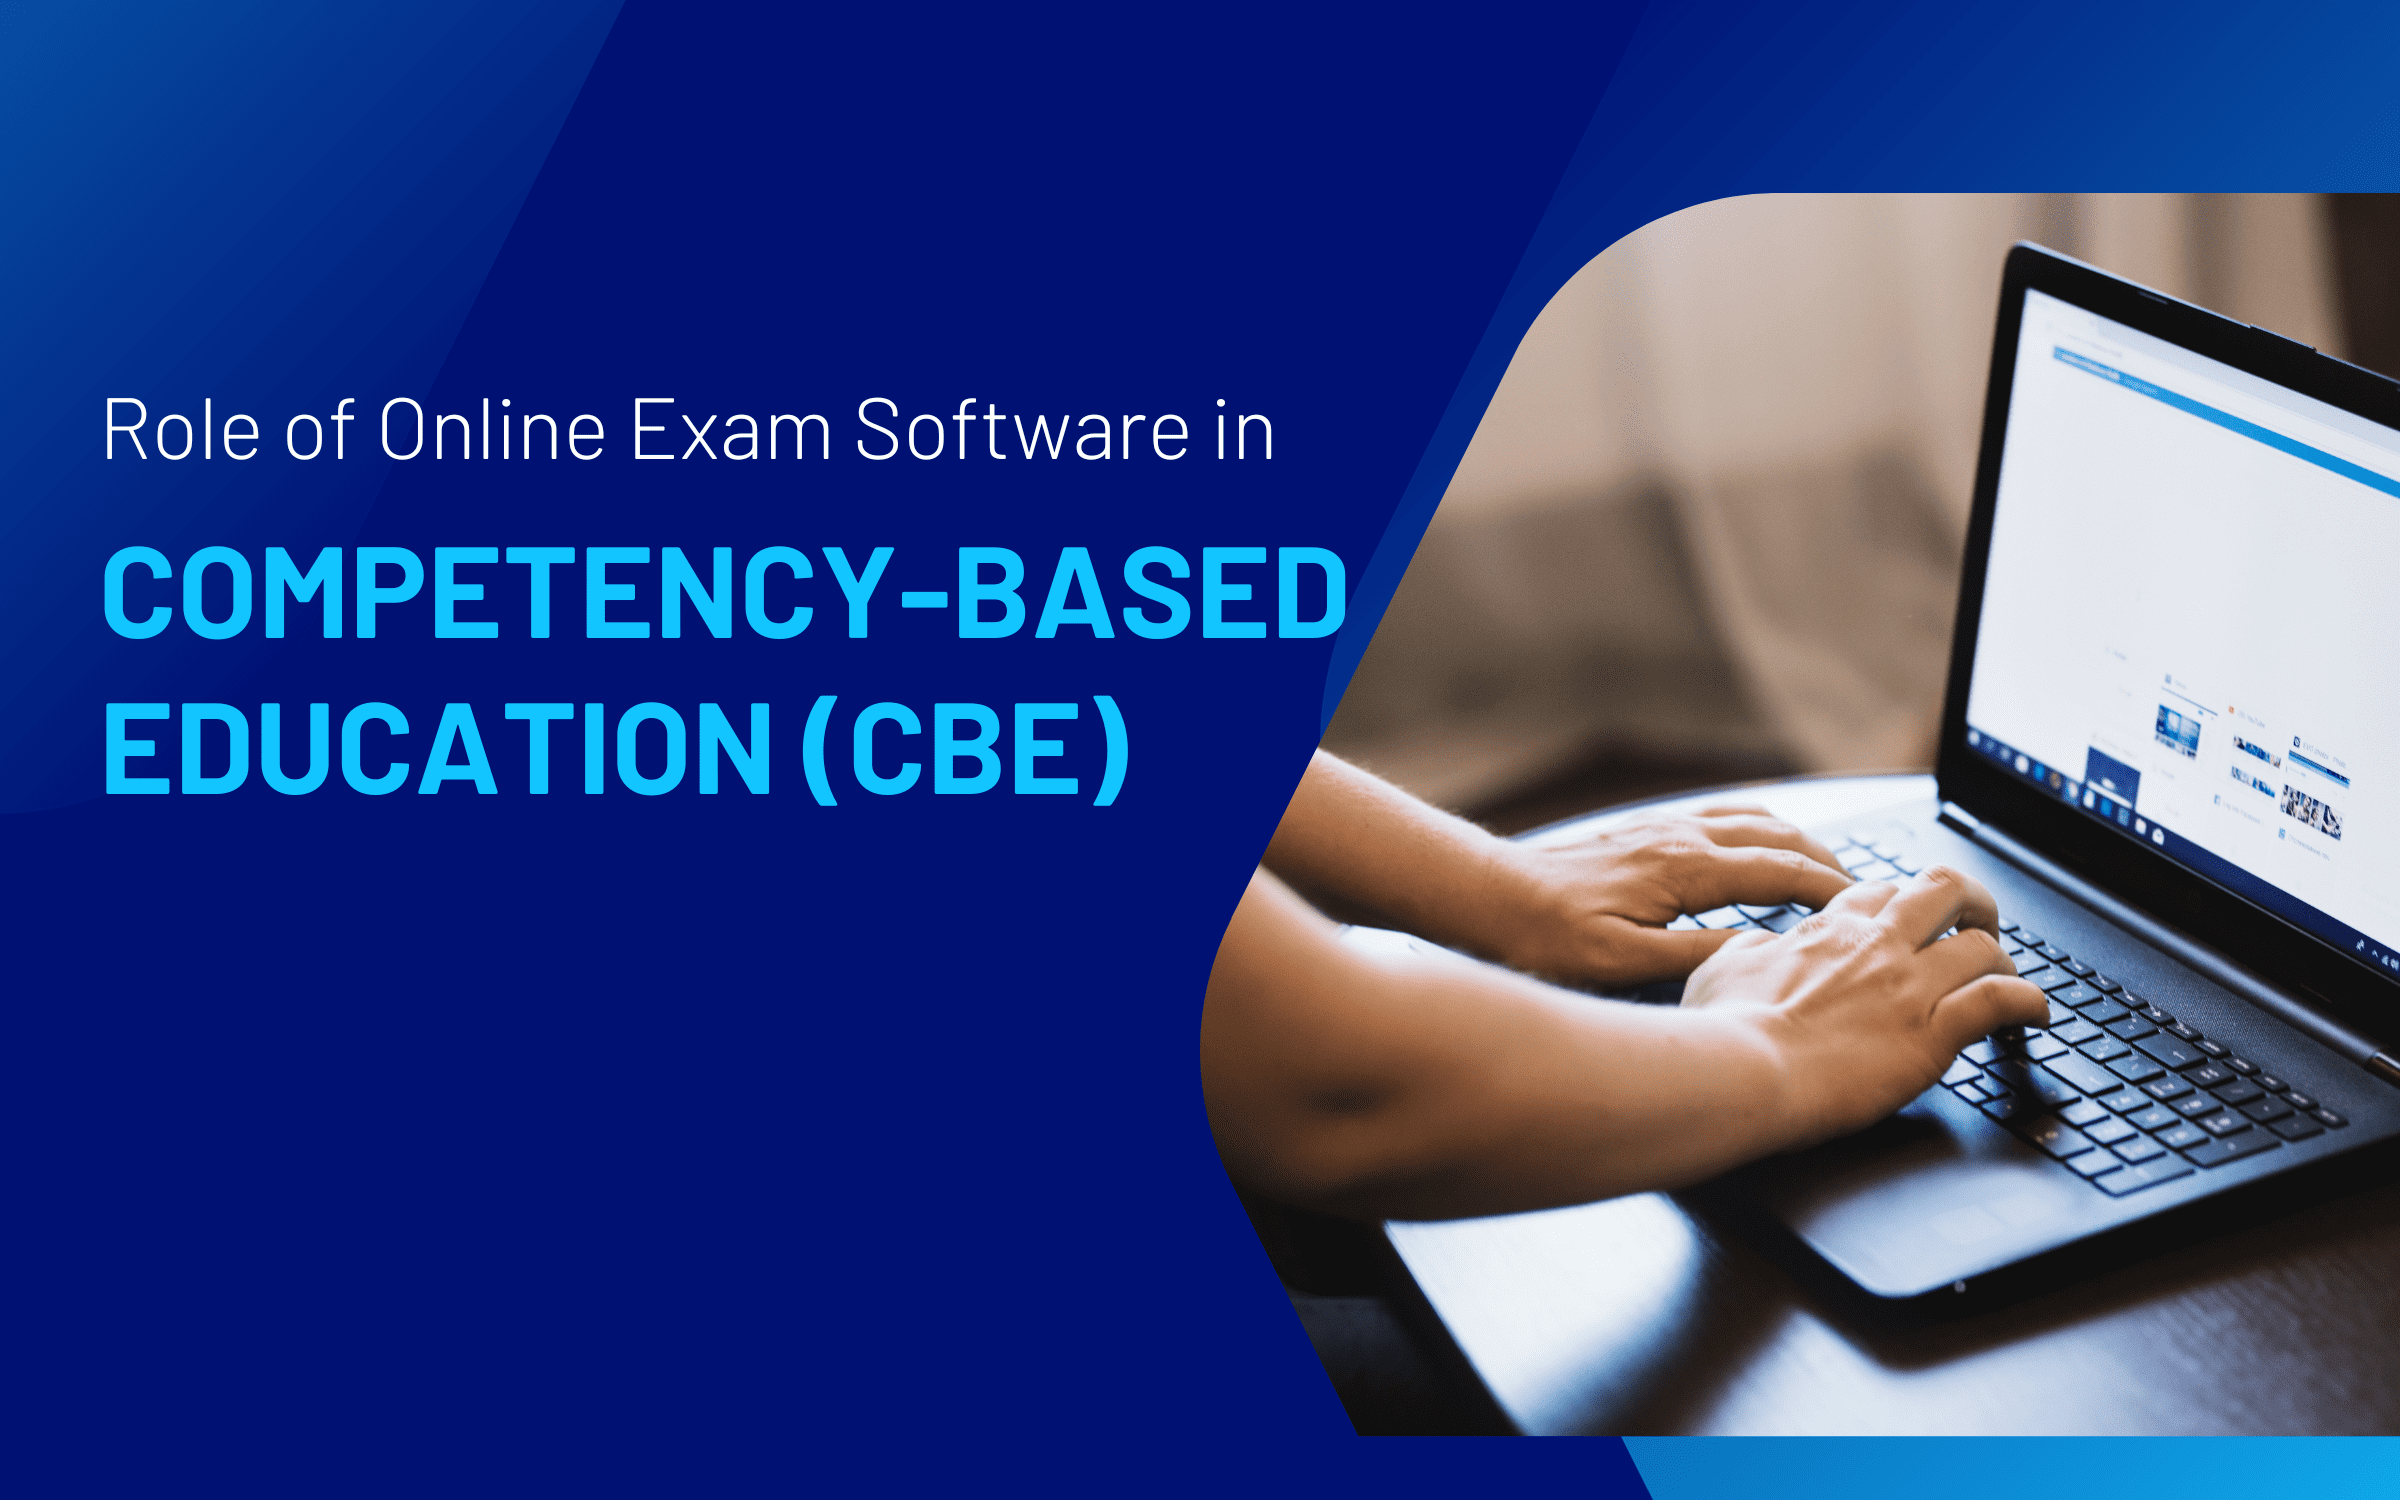 Role of Online Exam Software in Competency-Based Education